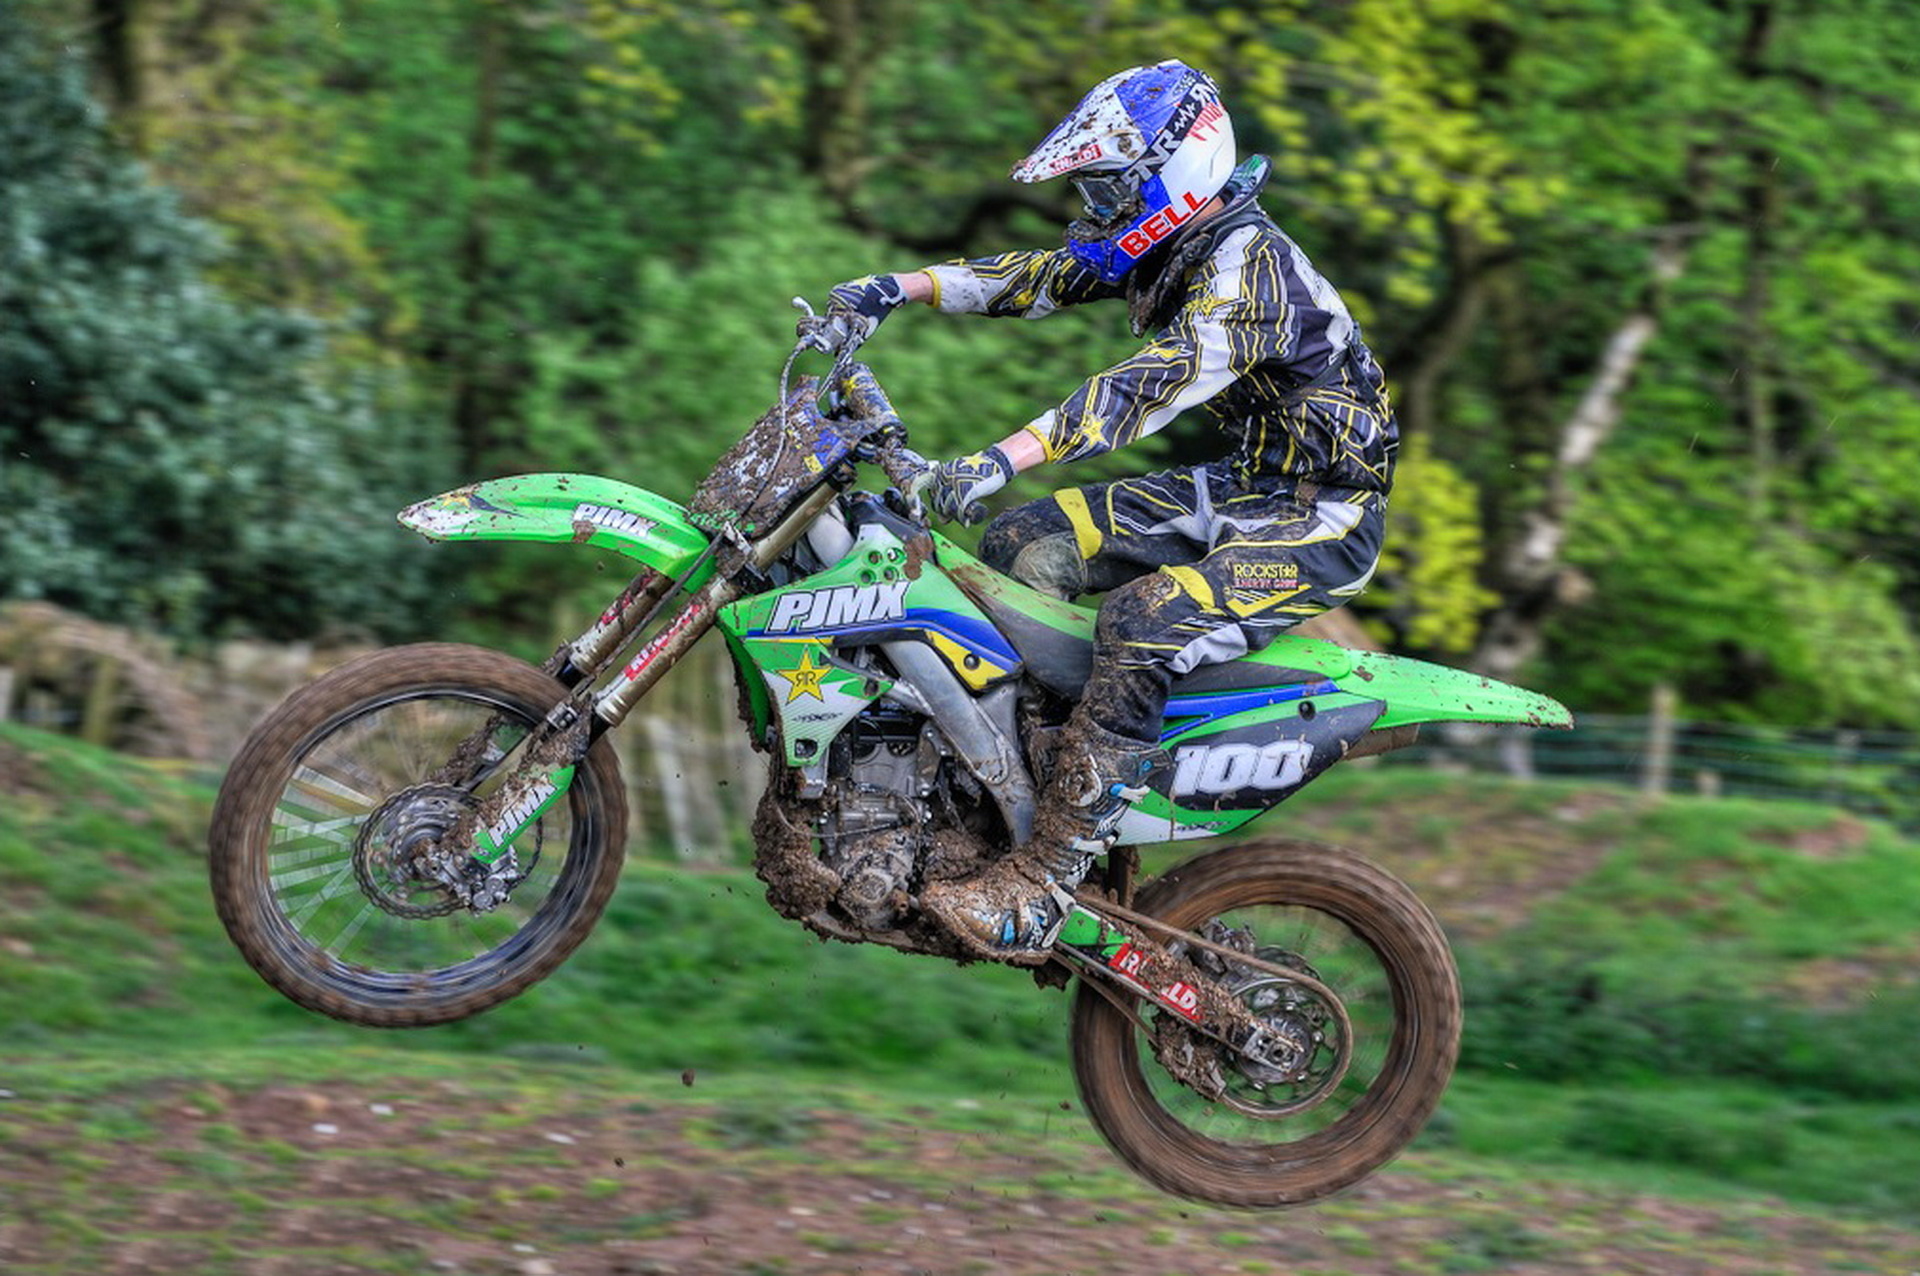 motocross, motorcycles, motorcycle, racer, competitions HD wallpaper